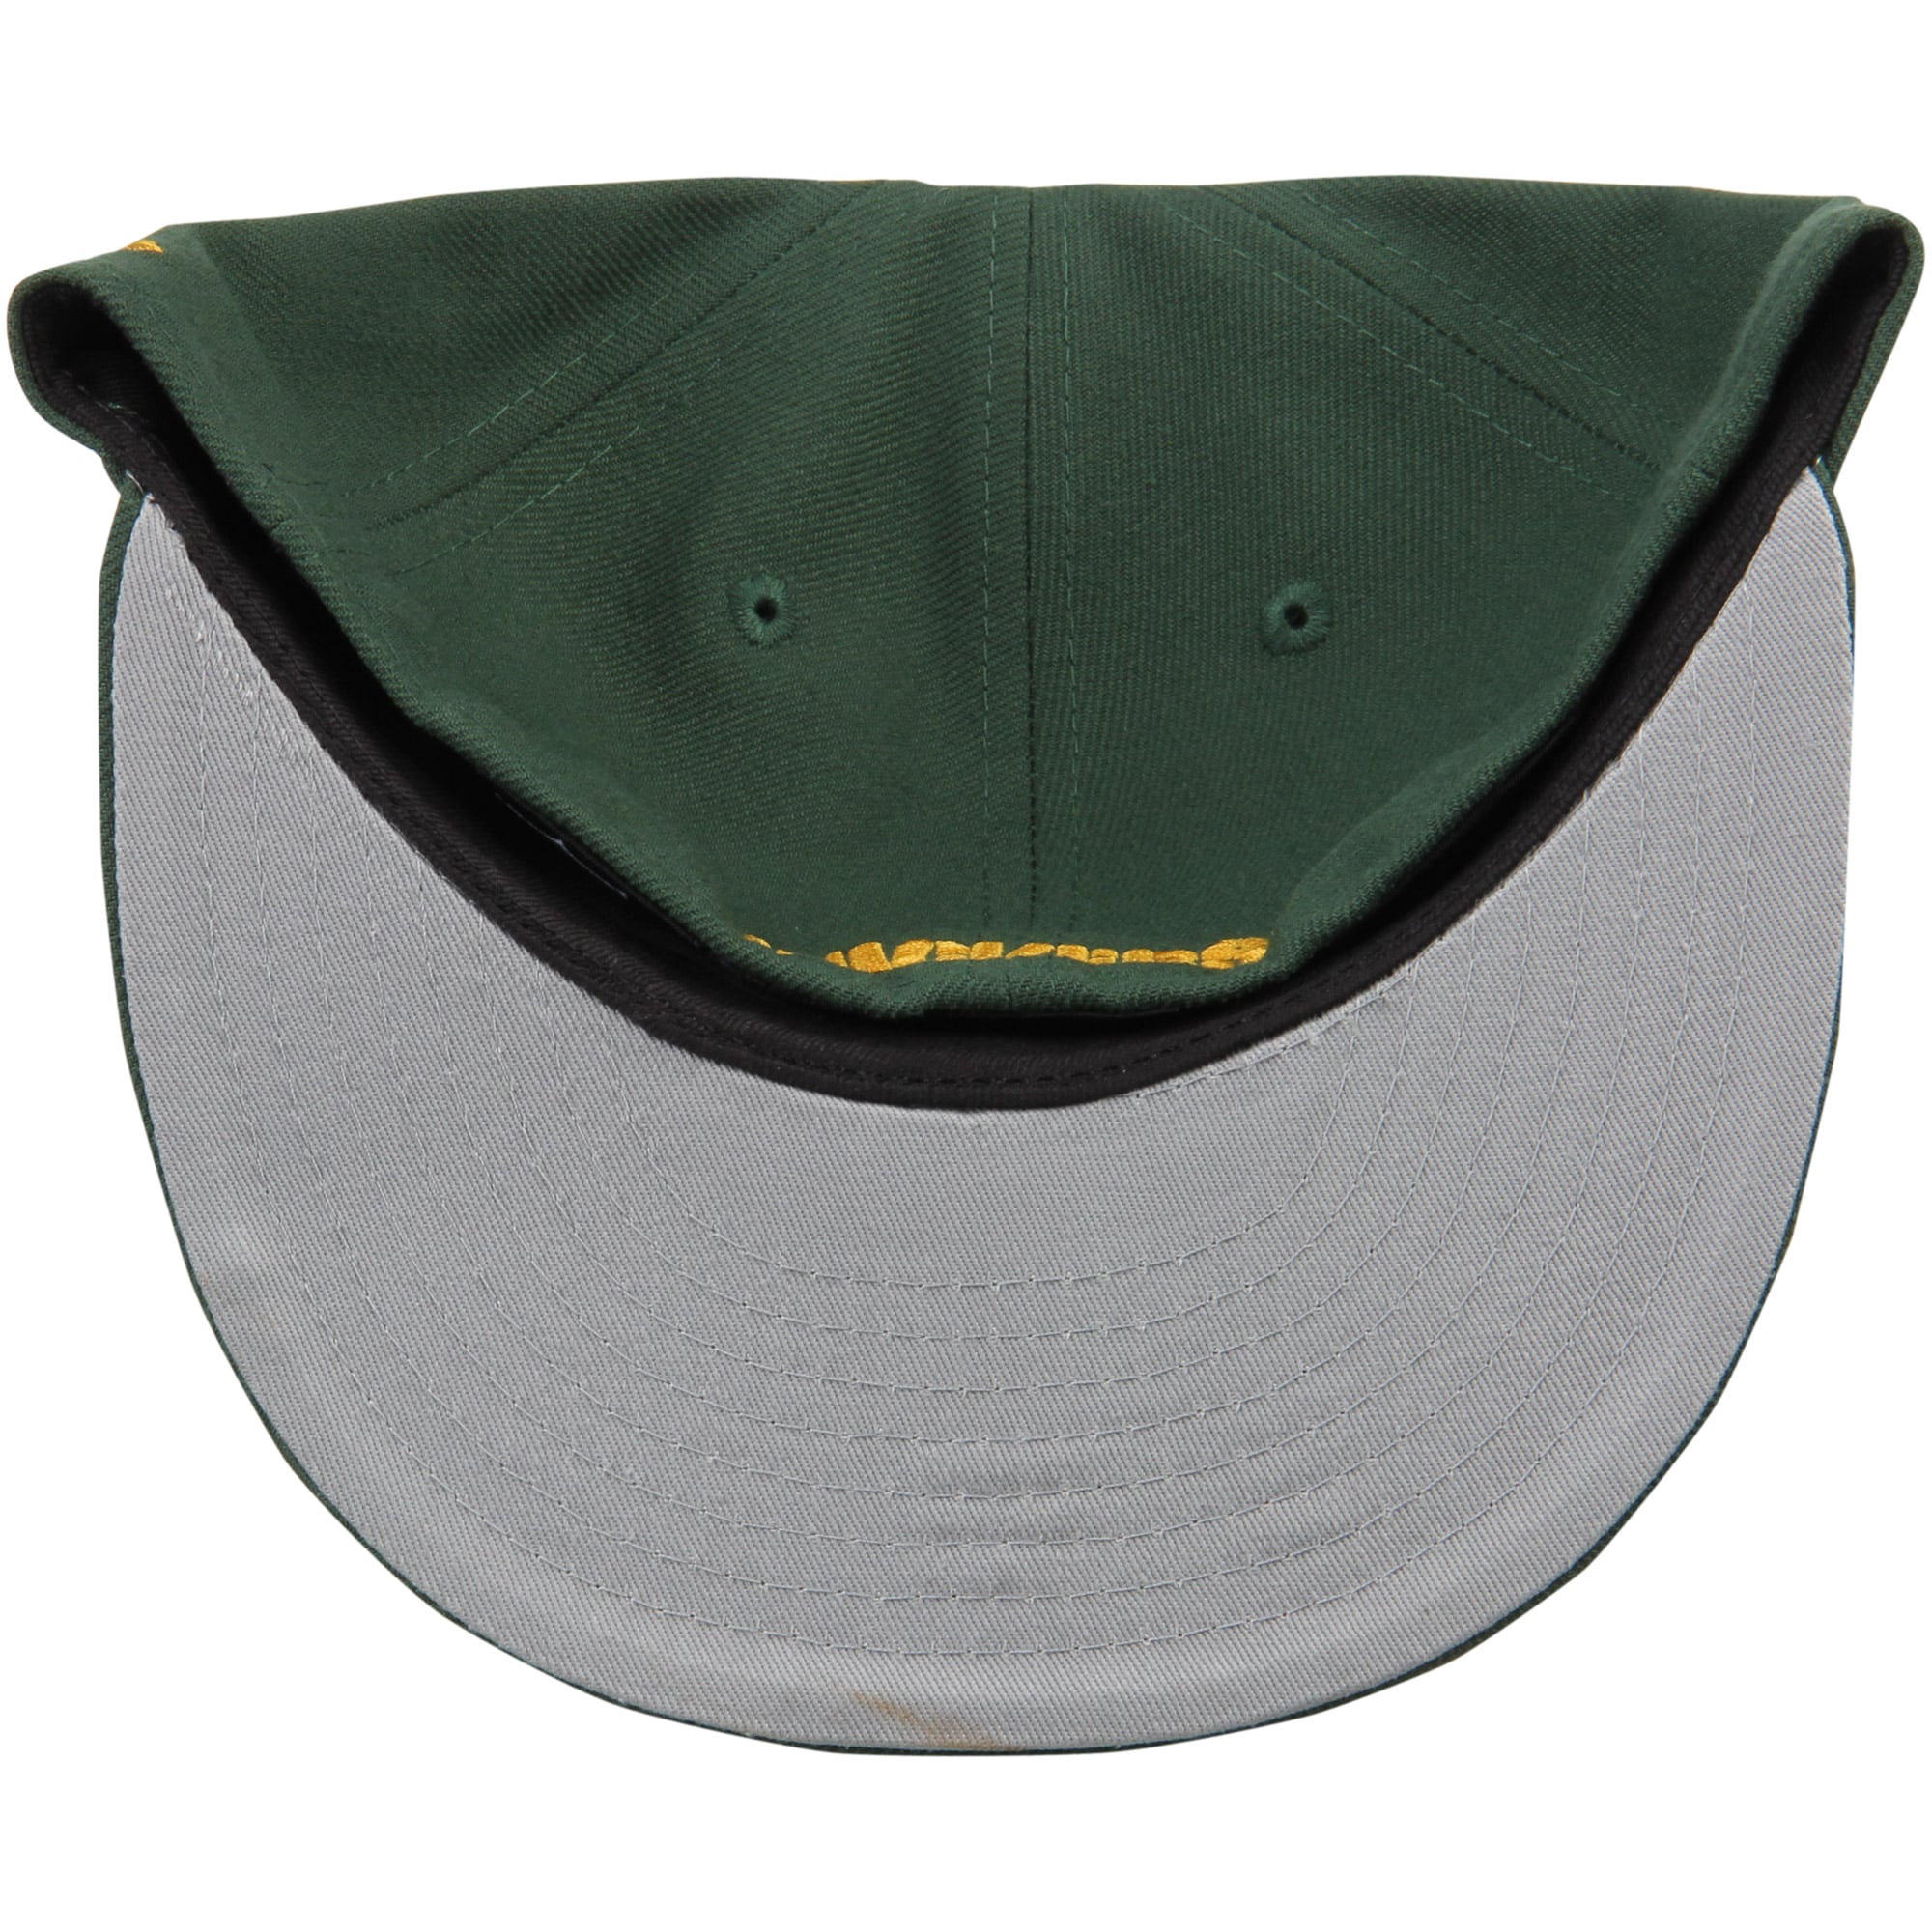 Men's New Era Green Green Bay Packers Omaha 59FIFTY Fitted Hat - image 4 of 4